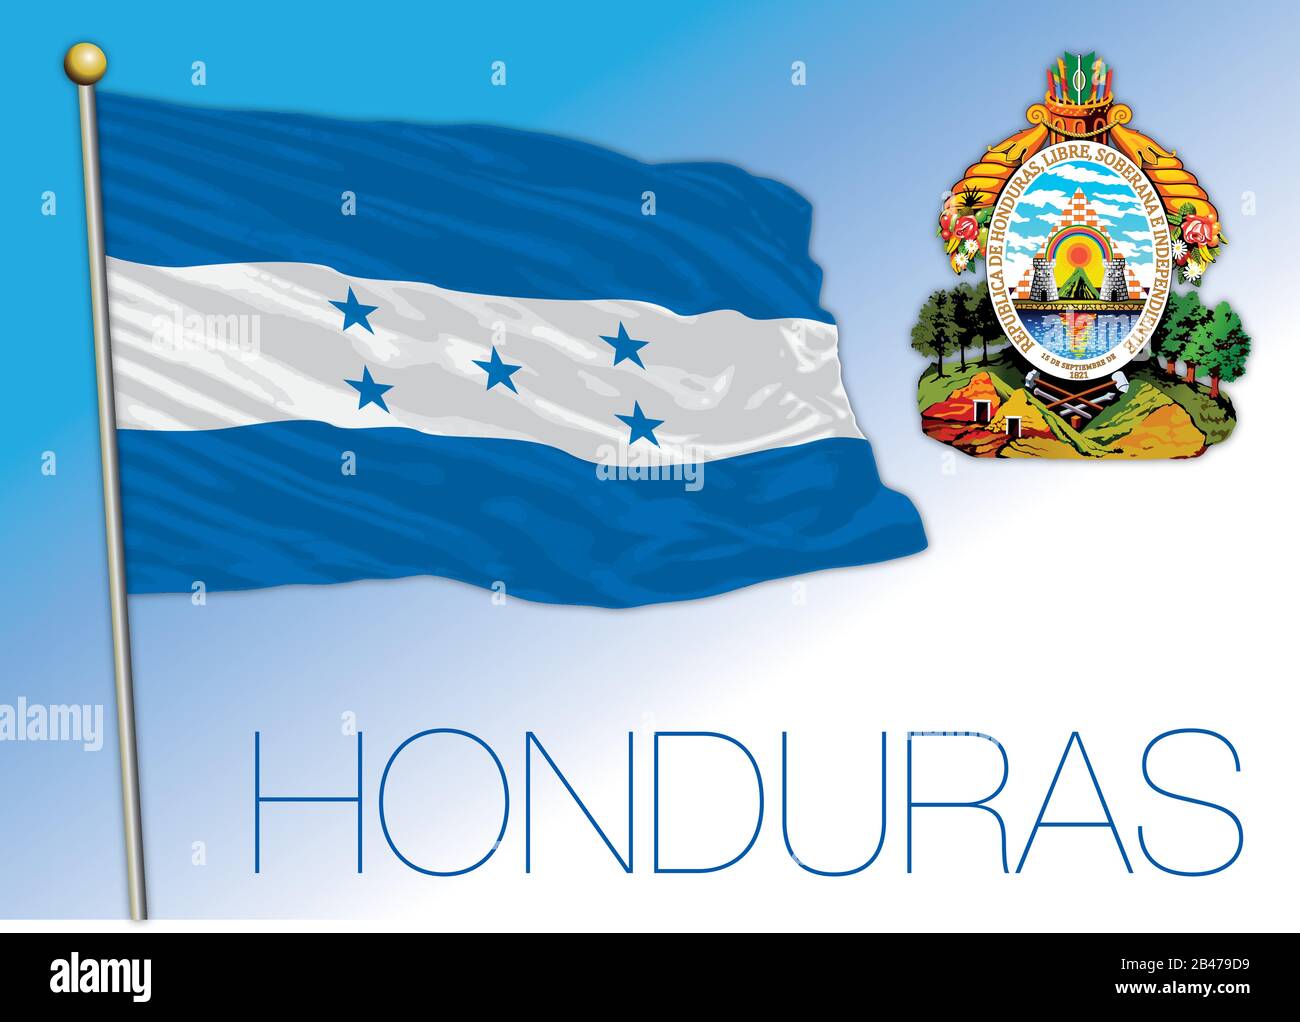 Honduras official national flag and coat of arms, central america, vector illustration Stock Vector